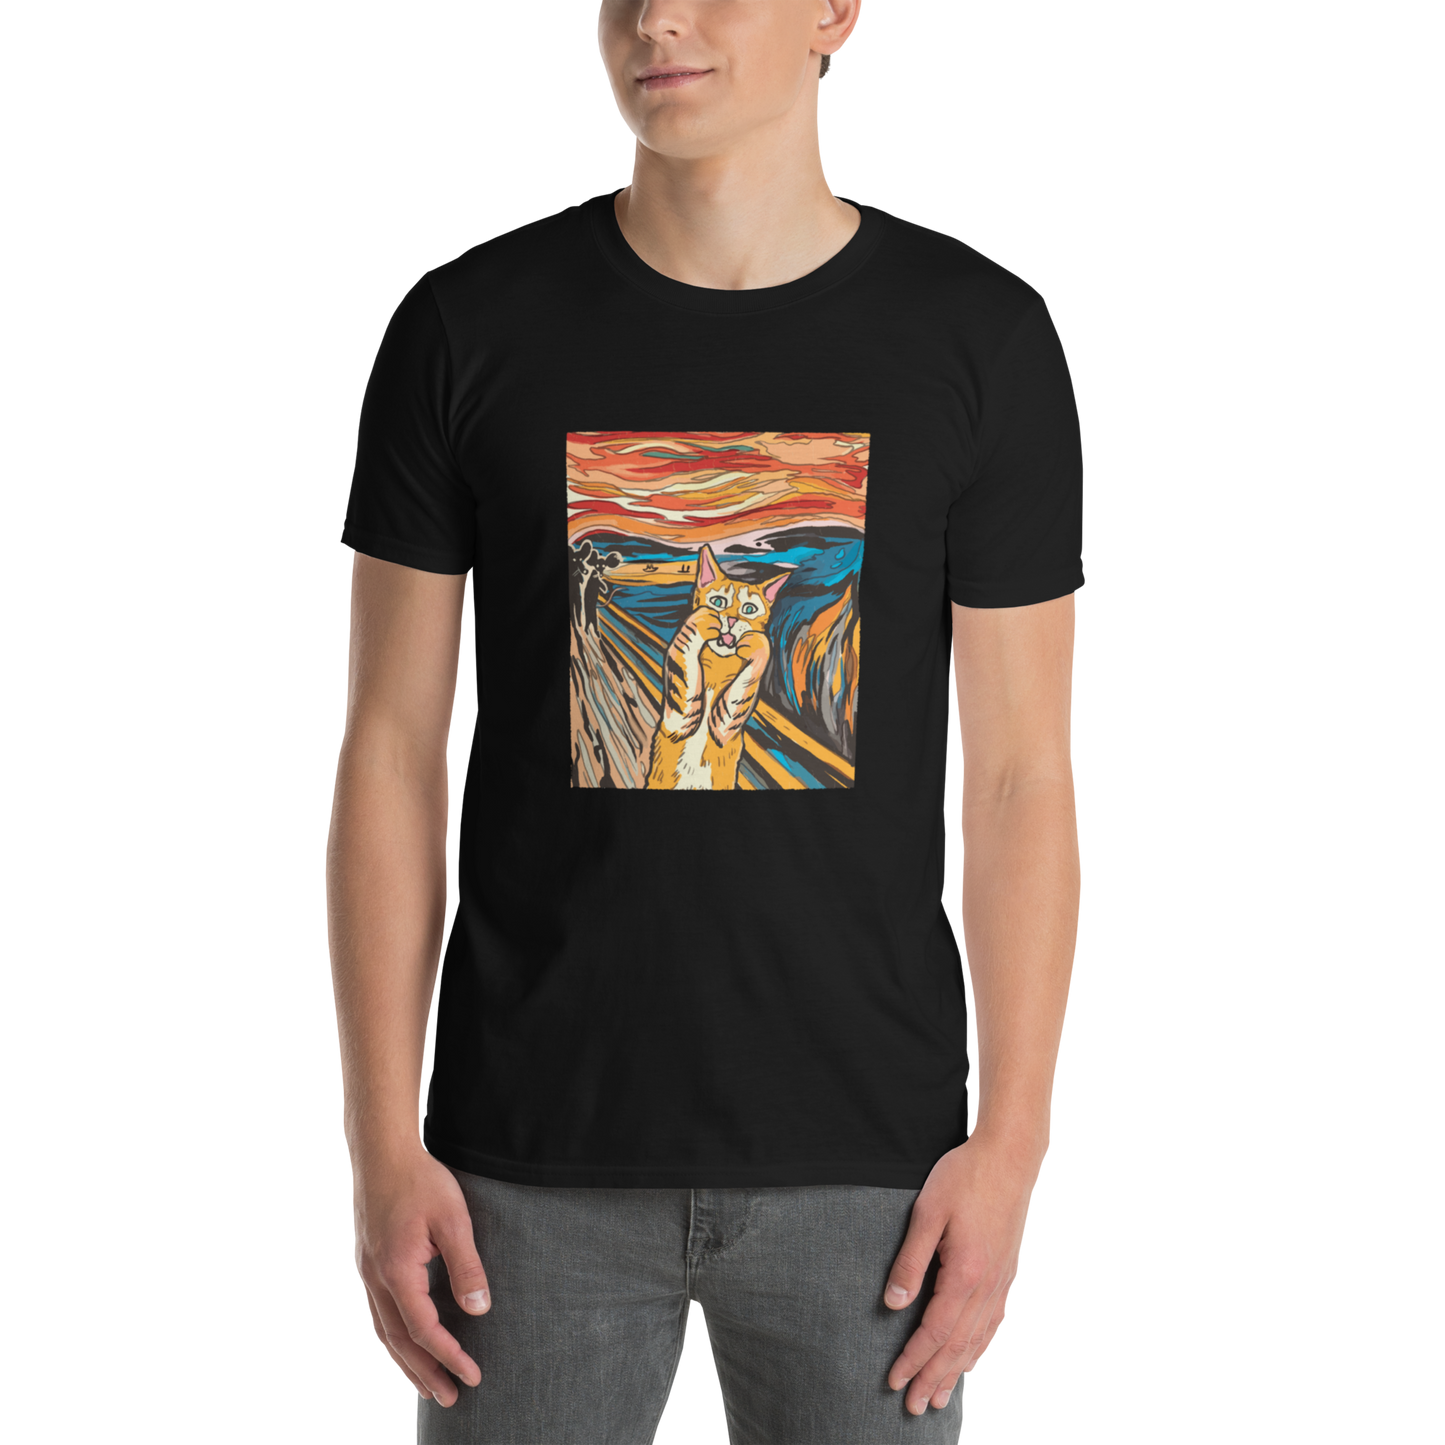 Man wearing a Black Screaming Cat T-Shirt showcasing iconic The Screaming Cat graphic on the chest - Funny Graphic Cat T-Shirts - Boozy Fox